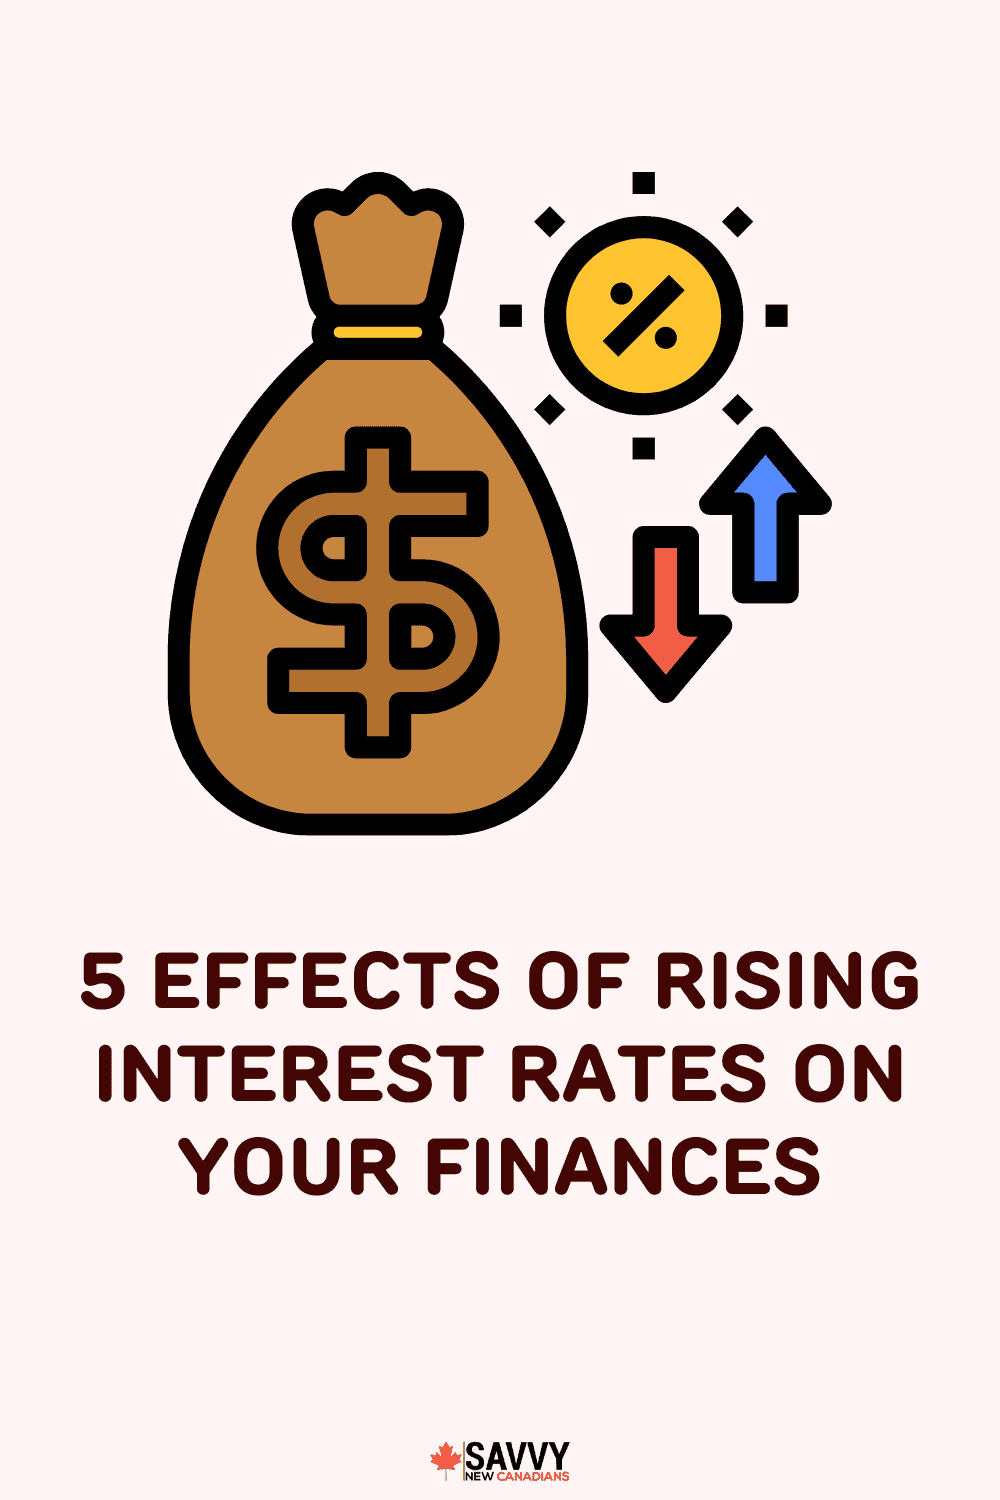 5 Effects of Rising Interest Rates On Your Finances in 2022